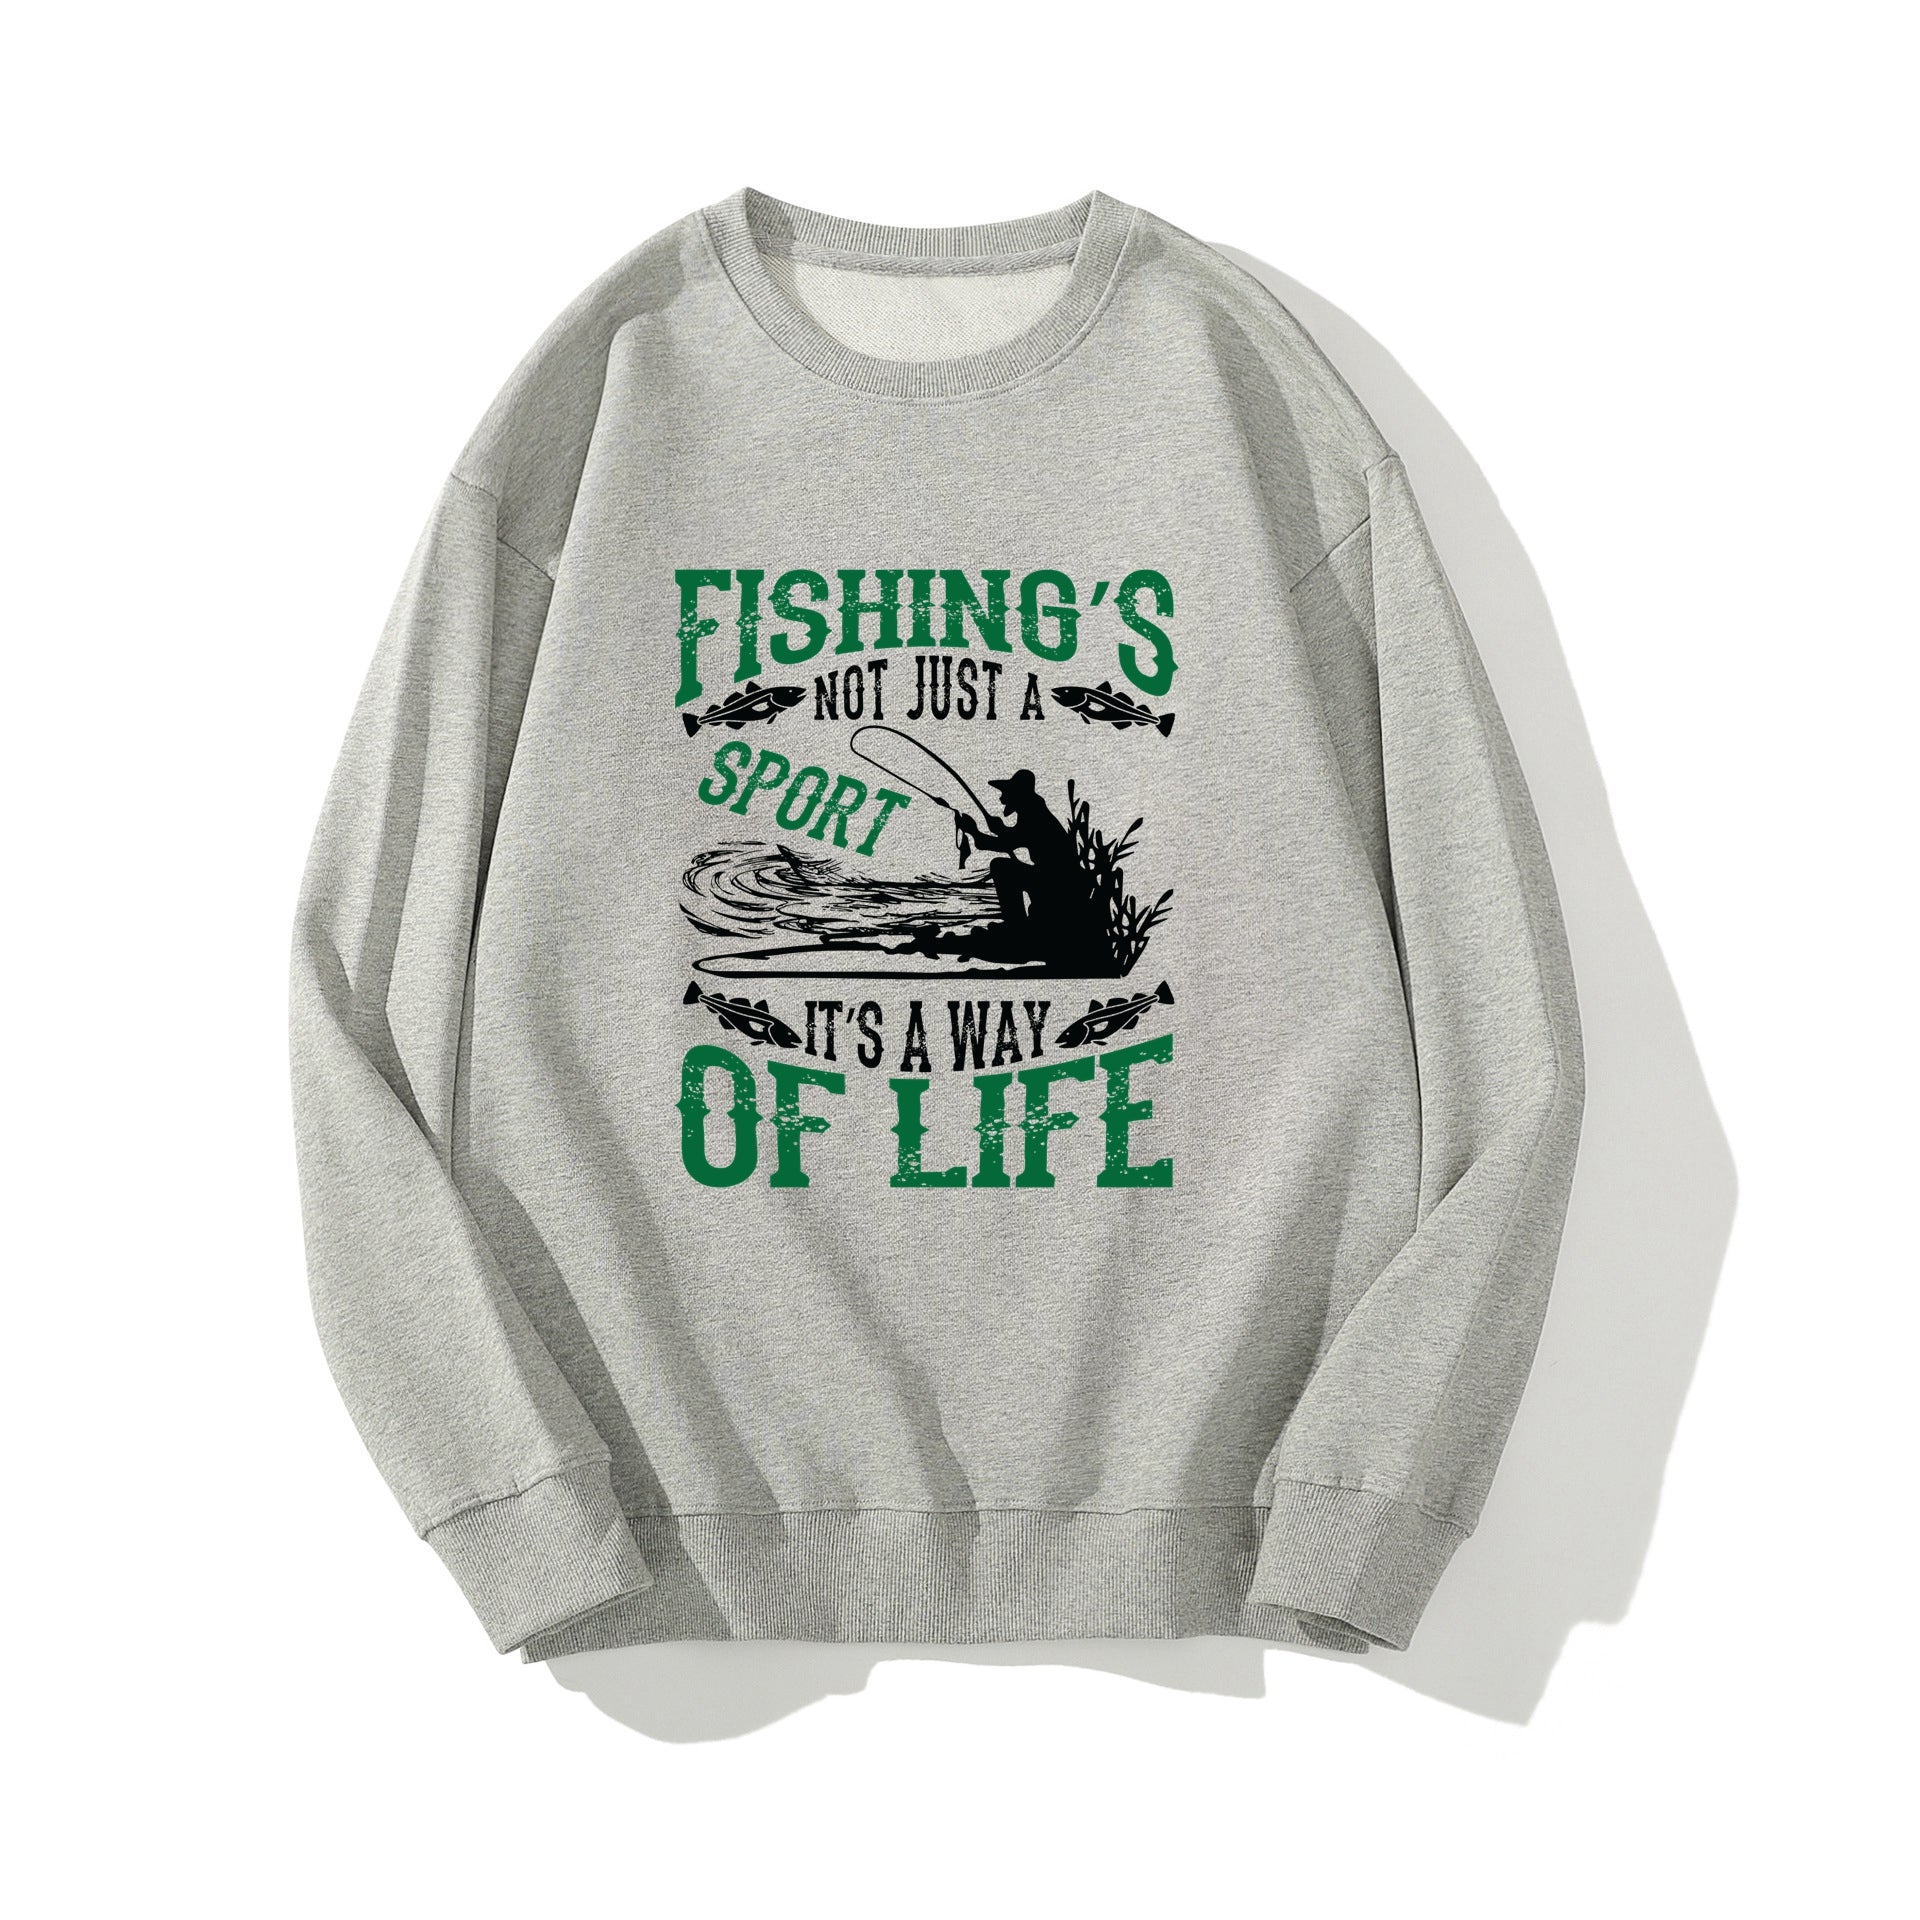 Men Fishing Graphic Printed Sweater Autumn Winter Cotton Tops Casual Tops